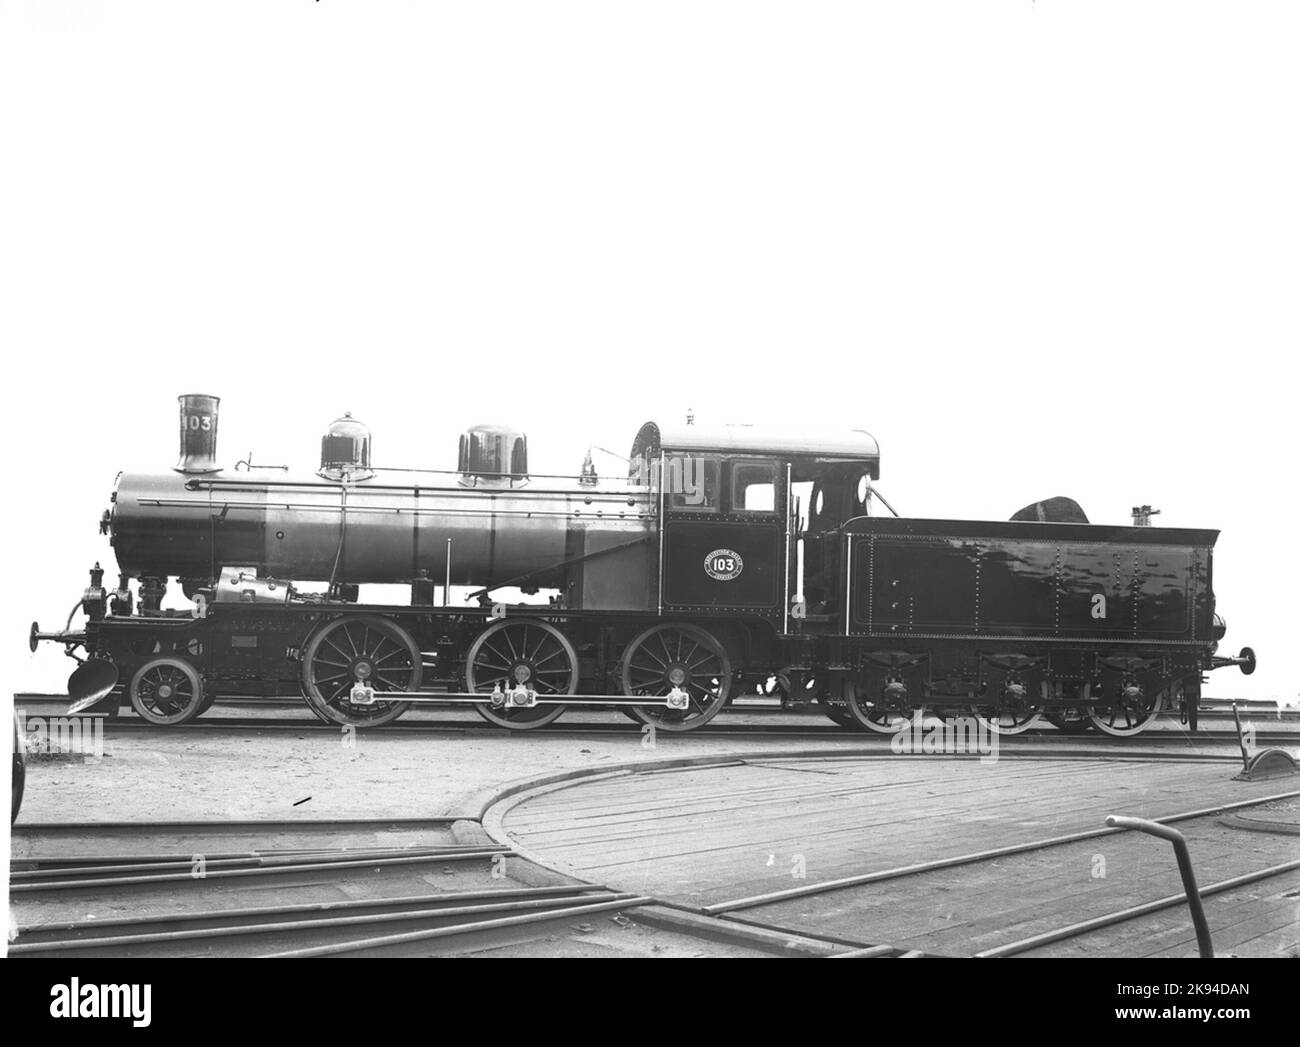 SNE L1 103. Delivery Photo. The locomotive was manufactured by Motala Workshop and had the highest speed 70 km per hour. Sold in 1940 to the State Railways and got Littera SJ L11 in 1573. Scraped in 1969 in Vislanda. Stock Photo